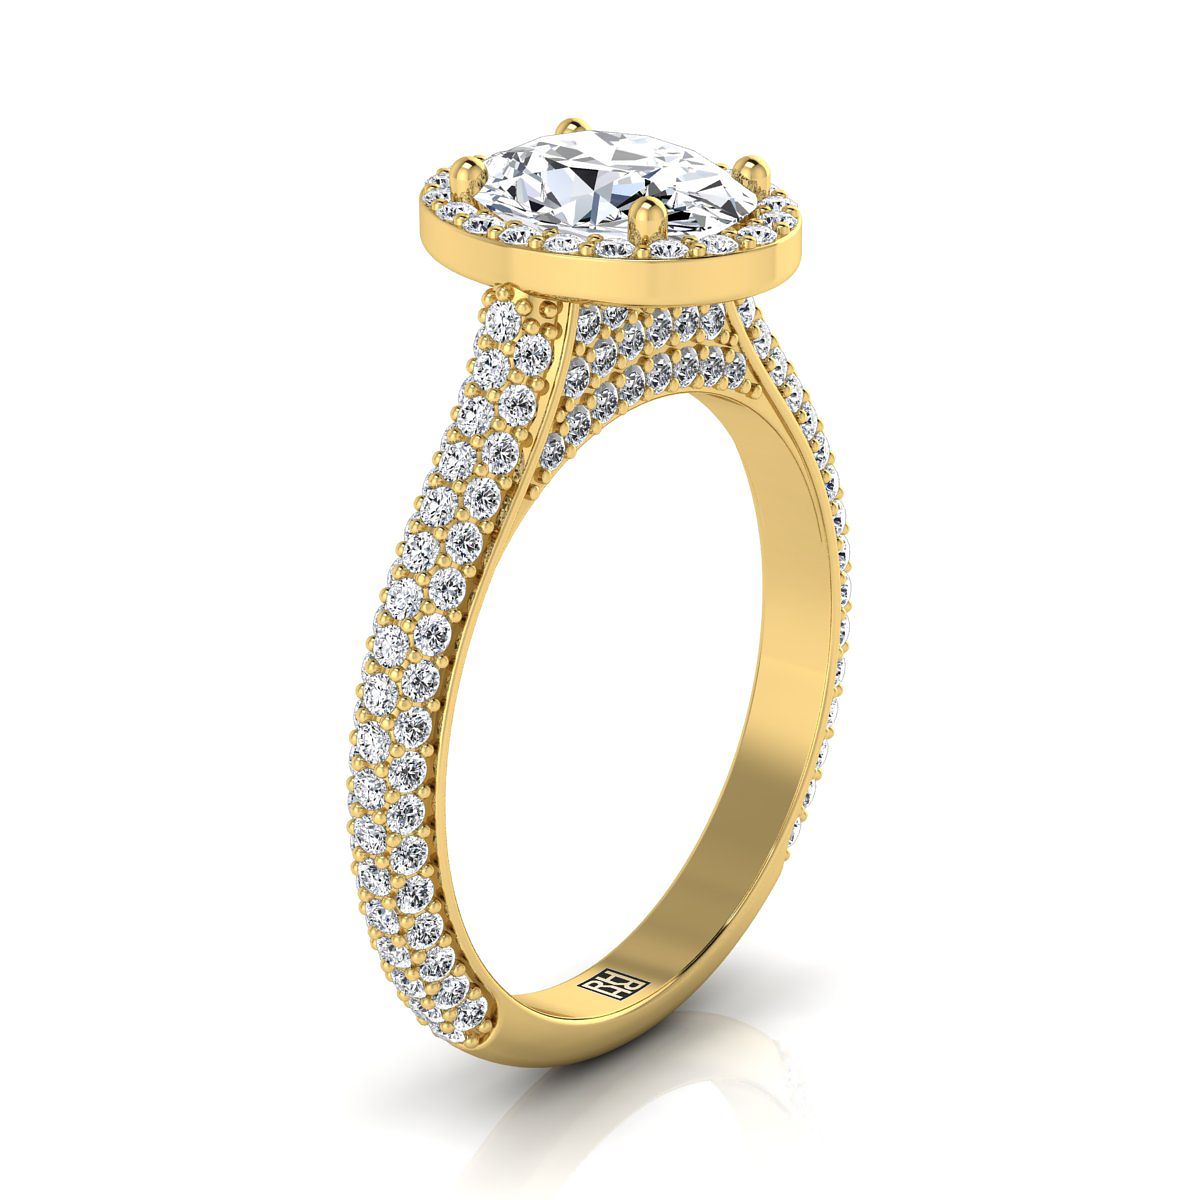 14K Yellow Gold Oval Aquamarine Micro-Pavé Halo With Pave Side Diamond Engagement Ring -7/8ctw